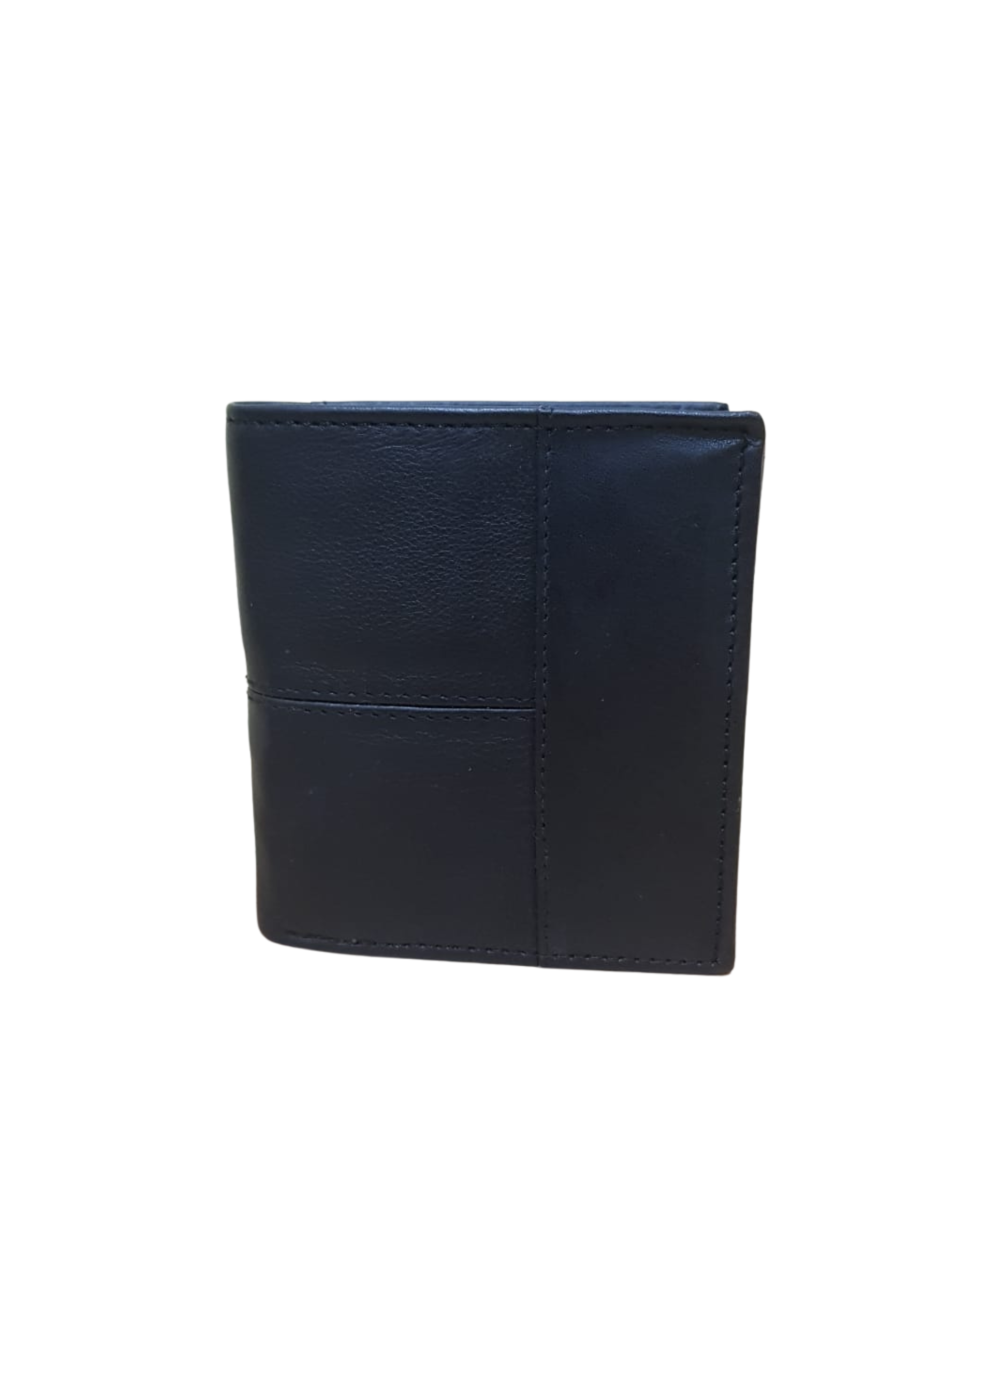 Two Fold Wallet For Men